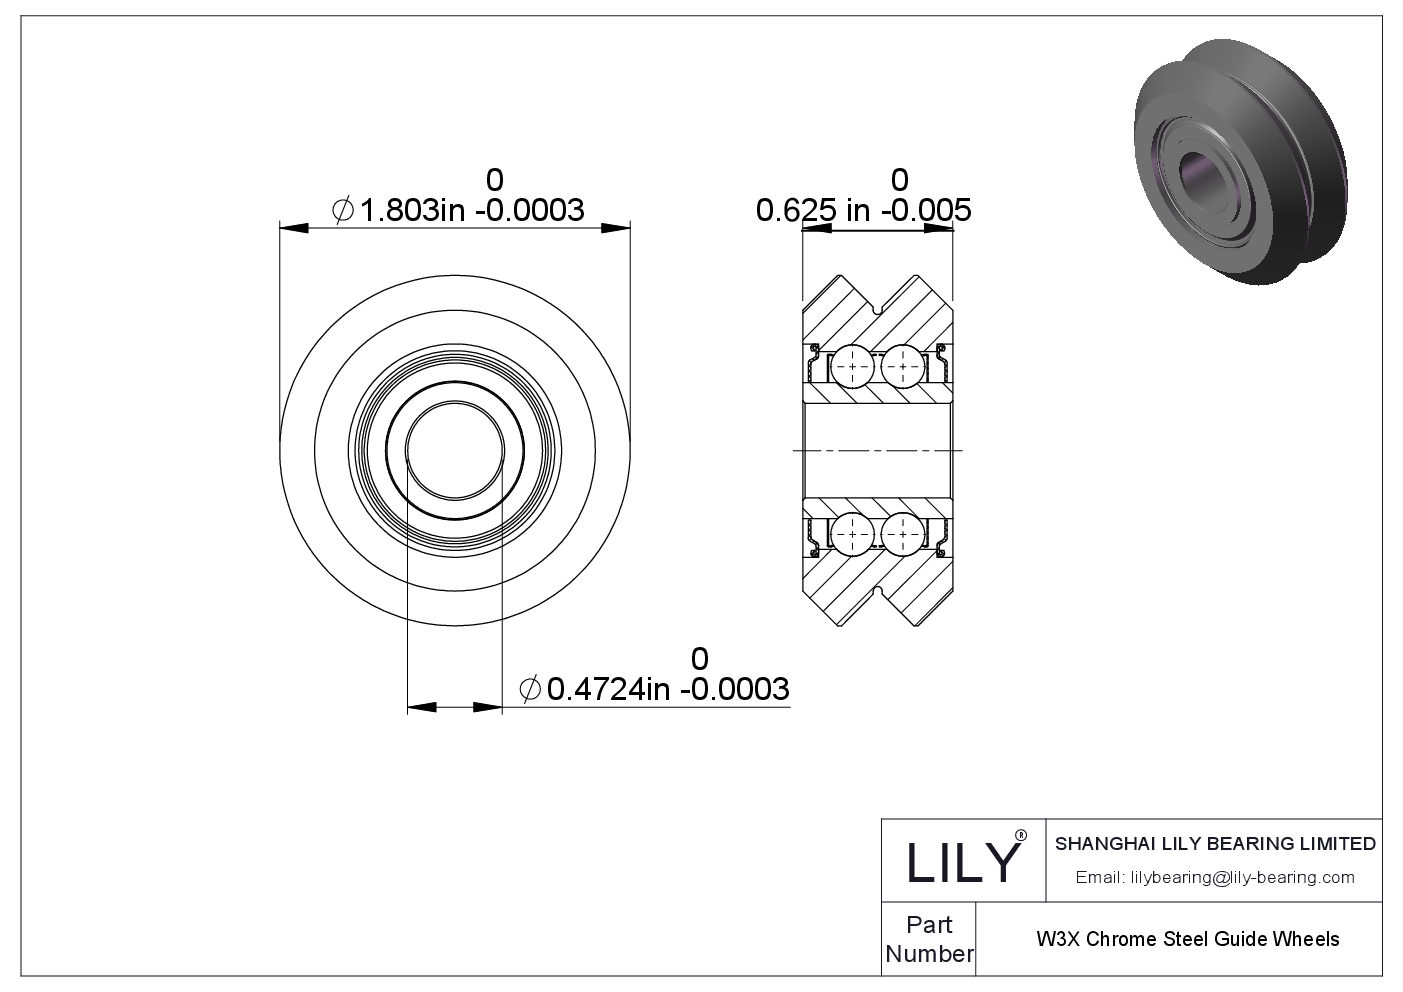 W3X Chrome Steel Guide Wheels cad drawing